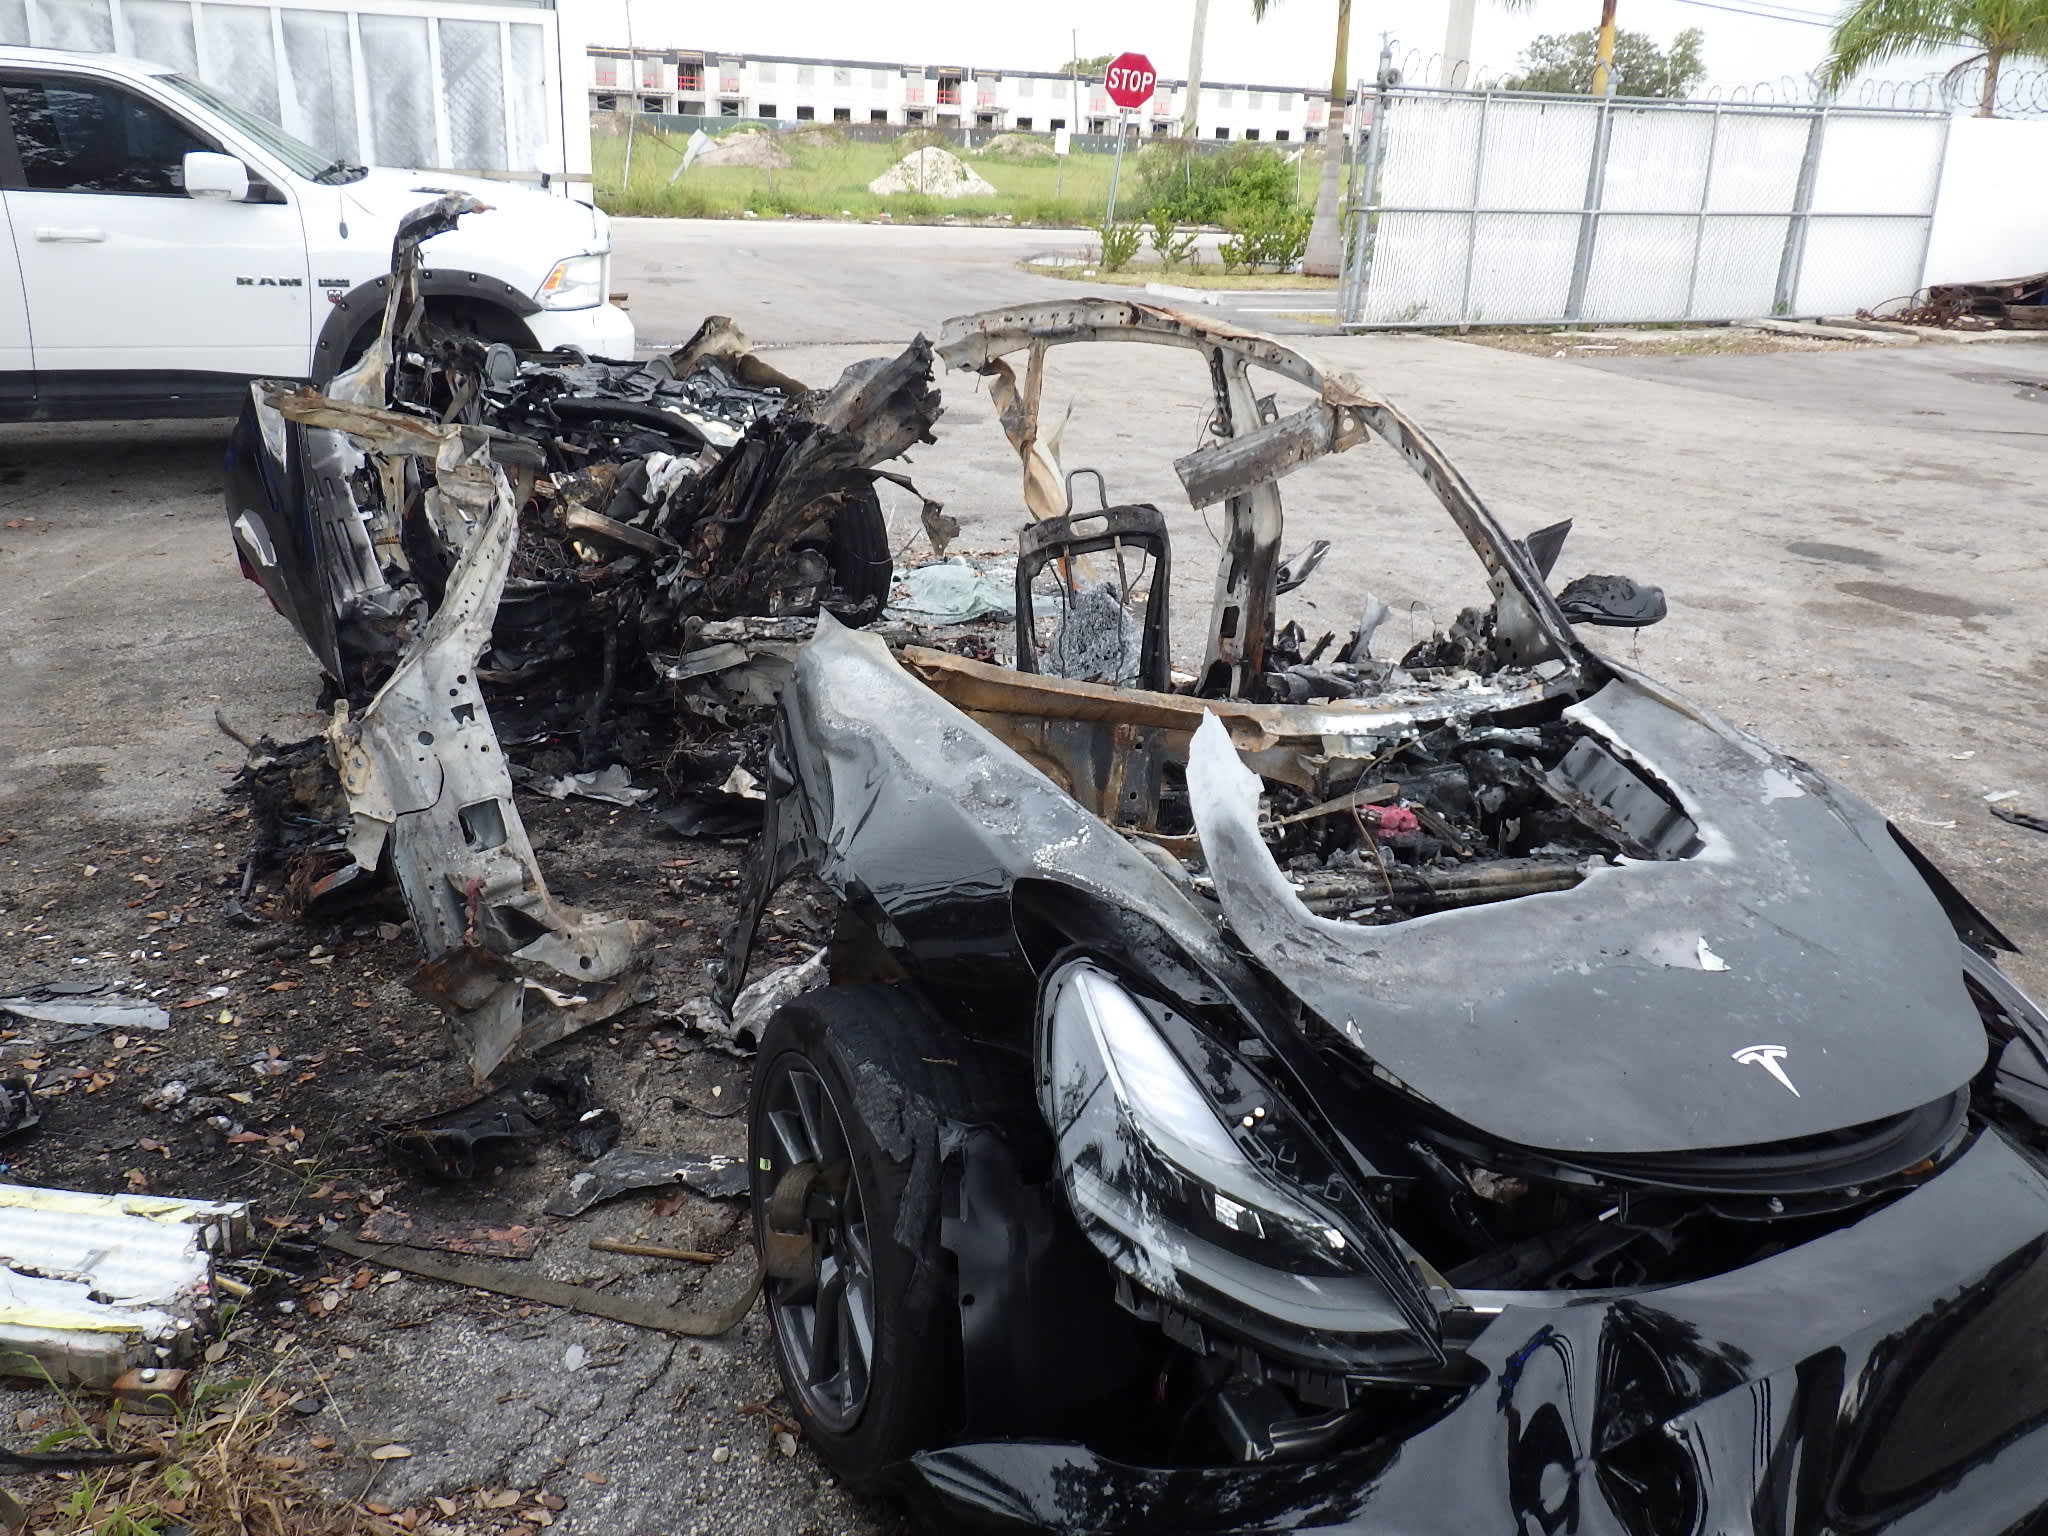 Tesla Model 3 was traveling up to 90 mph before fatal crash in Florida, NTSB finds Auto Recent